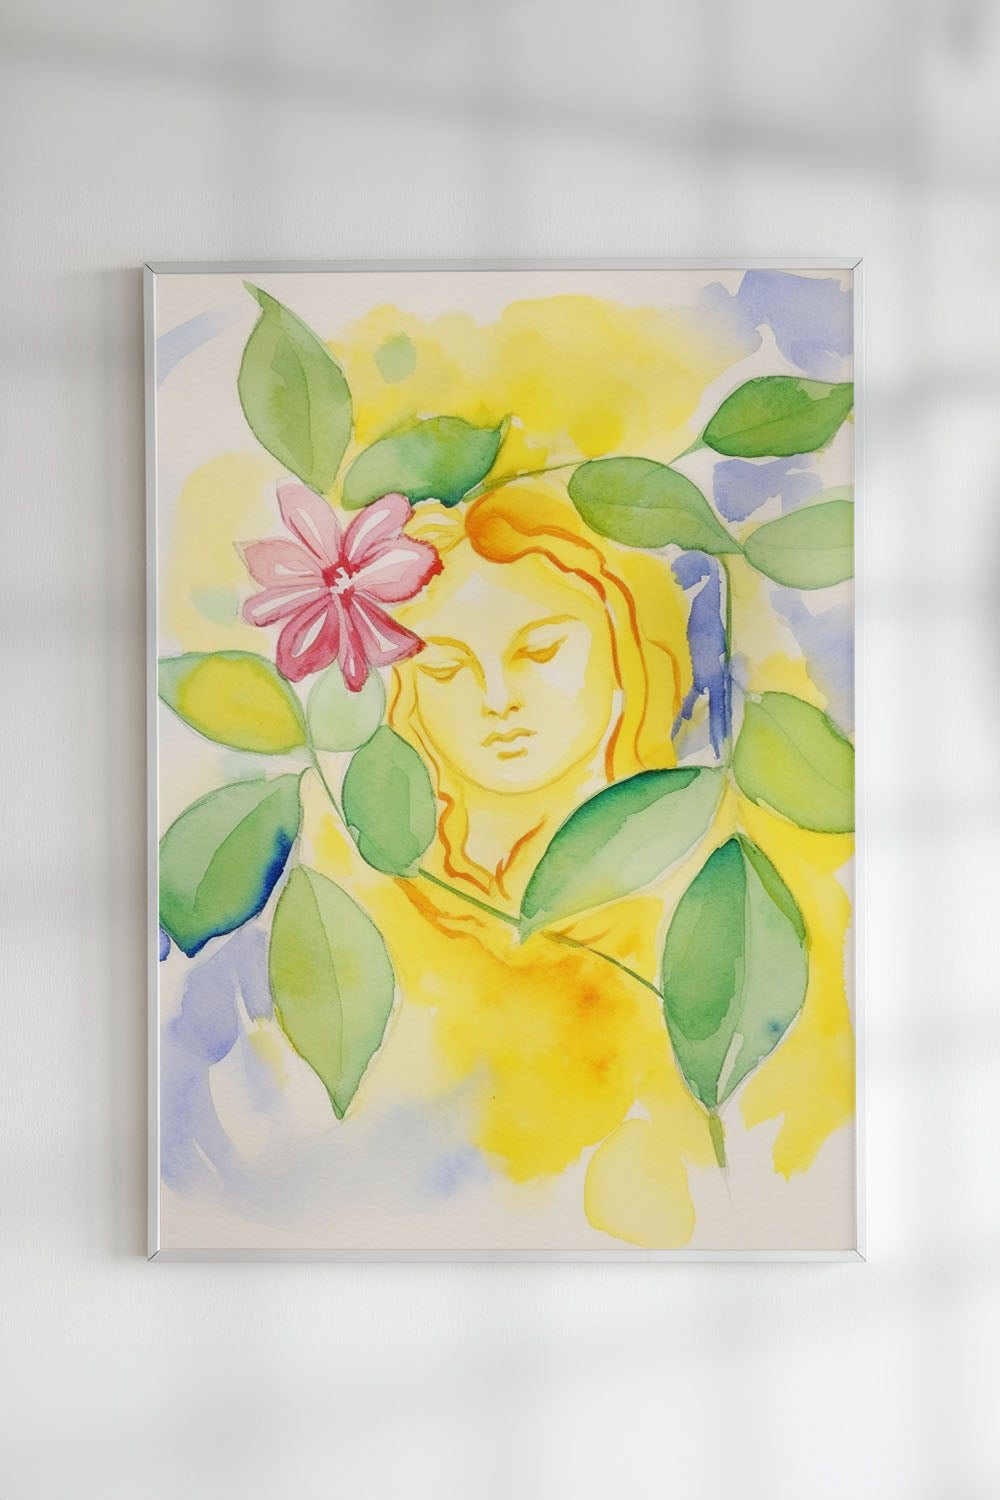 Watercolor art print of a woman inspired by lemon hues - Lemon Veil from the Fruit Whisperings series by Cassie Dagostino